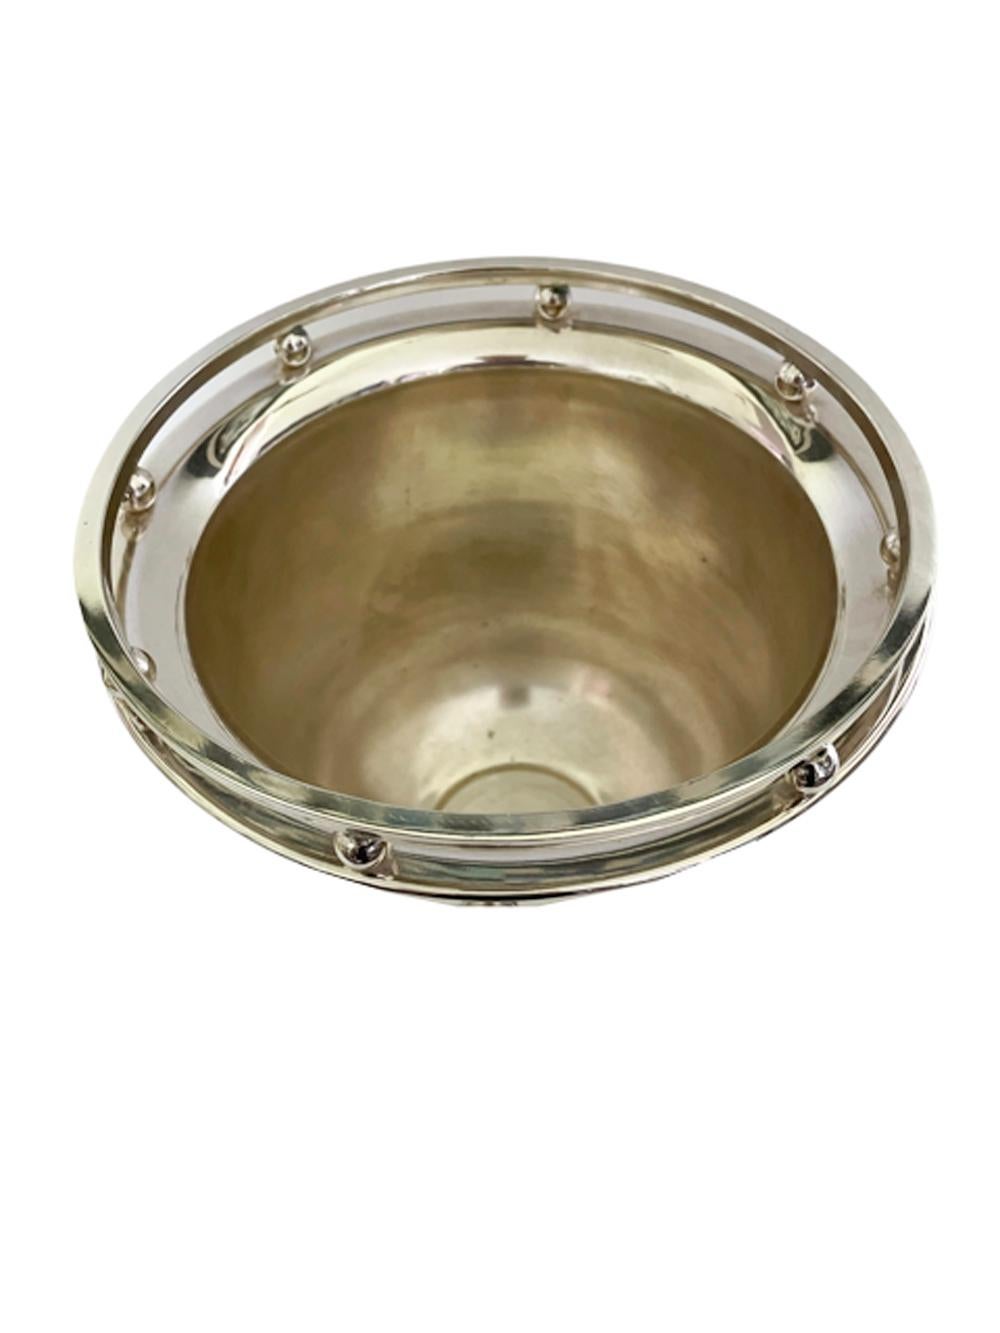 Vintage silver plate champagne bucket / wine cooler raised on a stepped circular foot and with knob handles having a cylindrical body with rounded bottom and flared rim with a circular gallery raised on spheres. Marked on the foot 